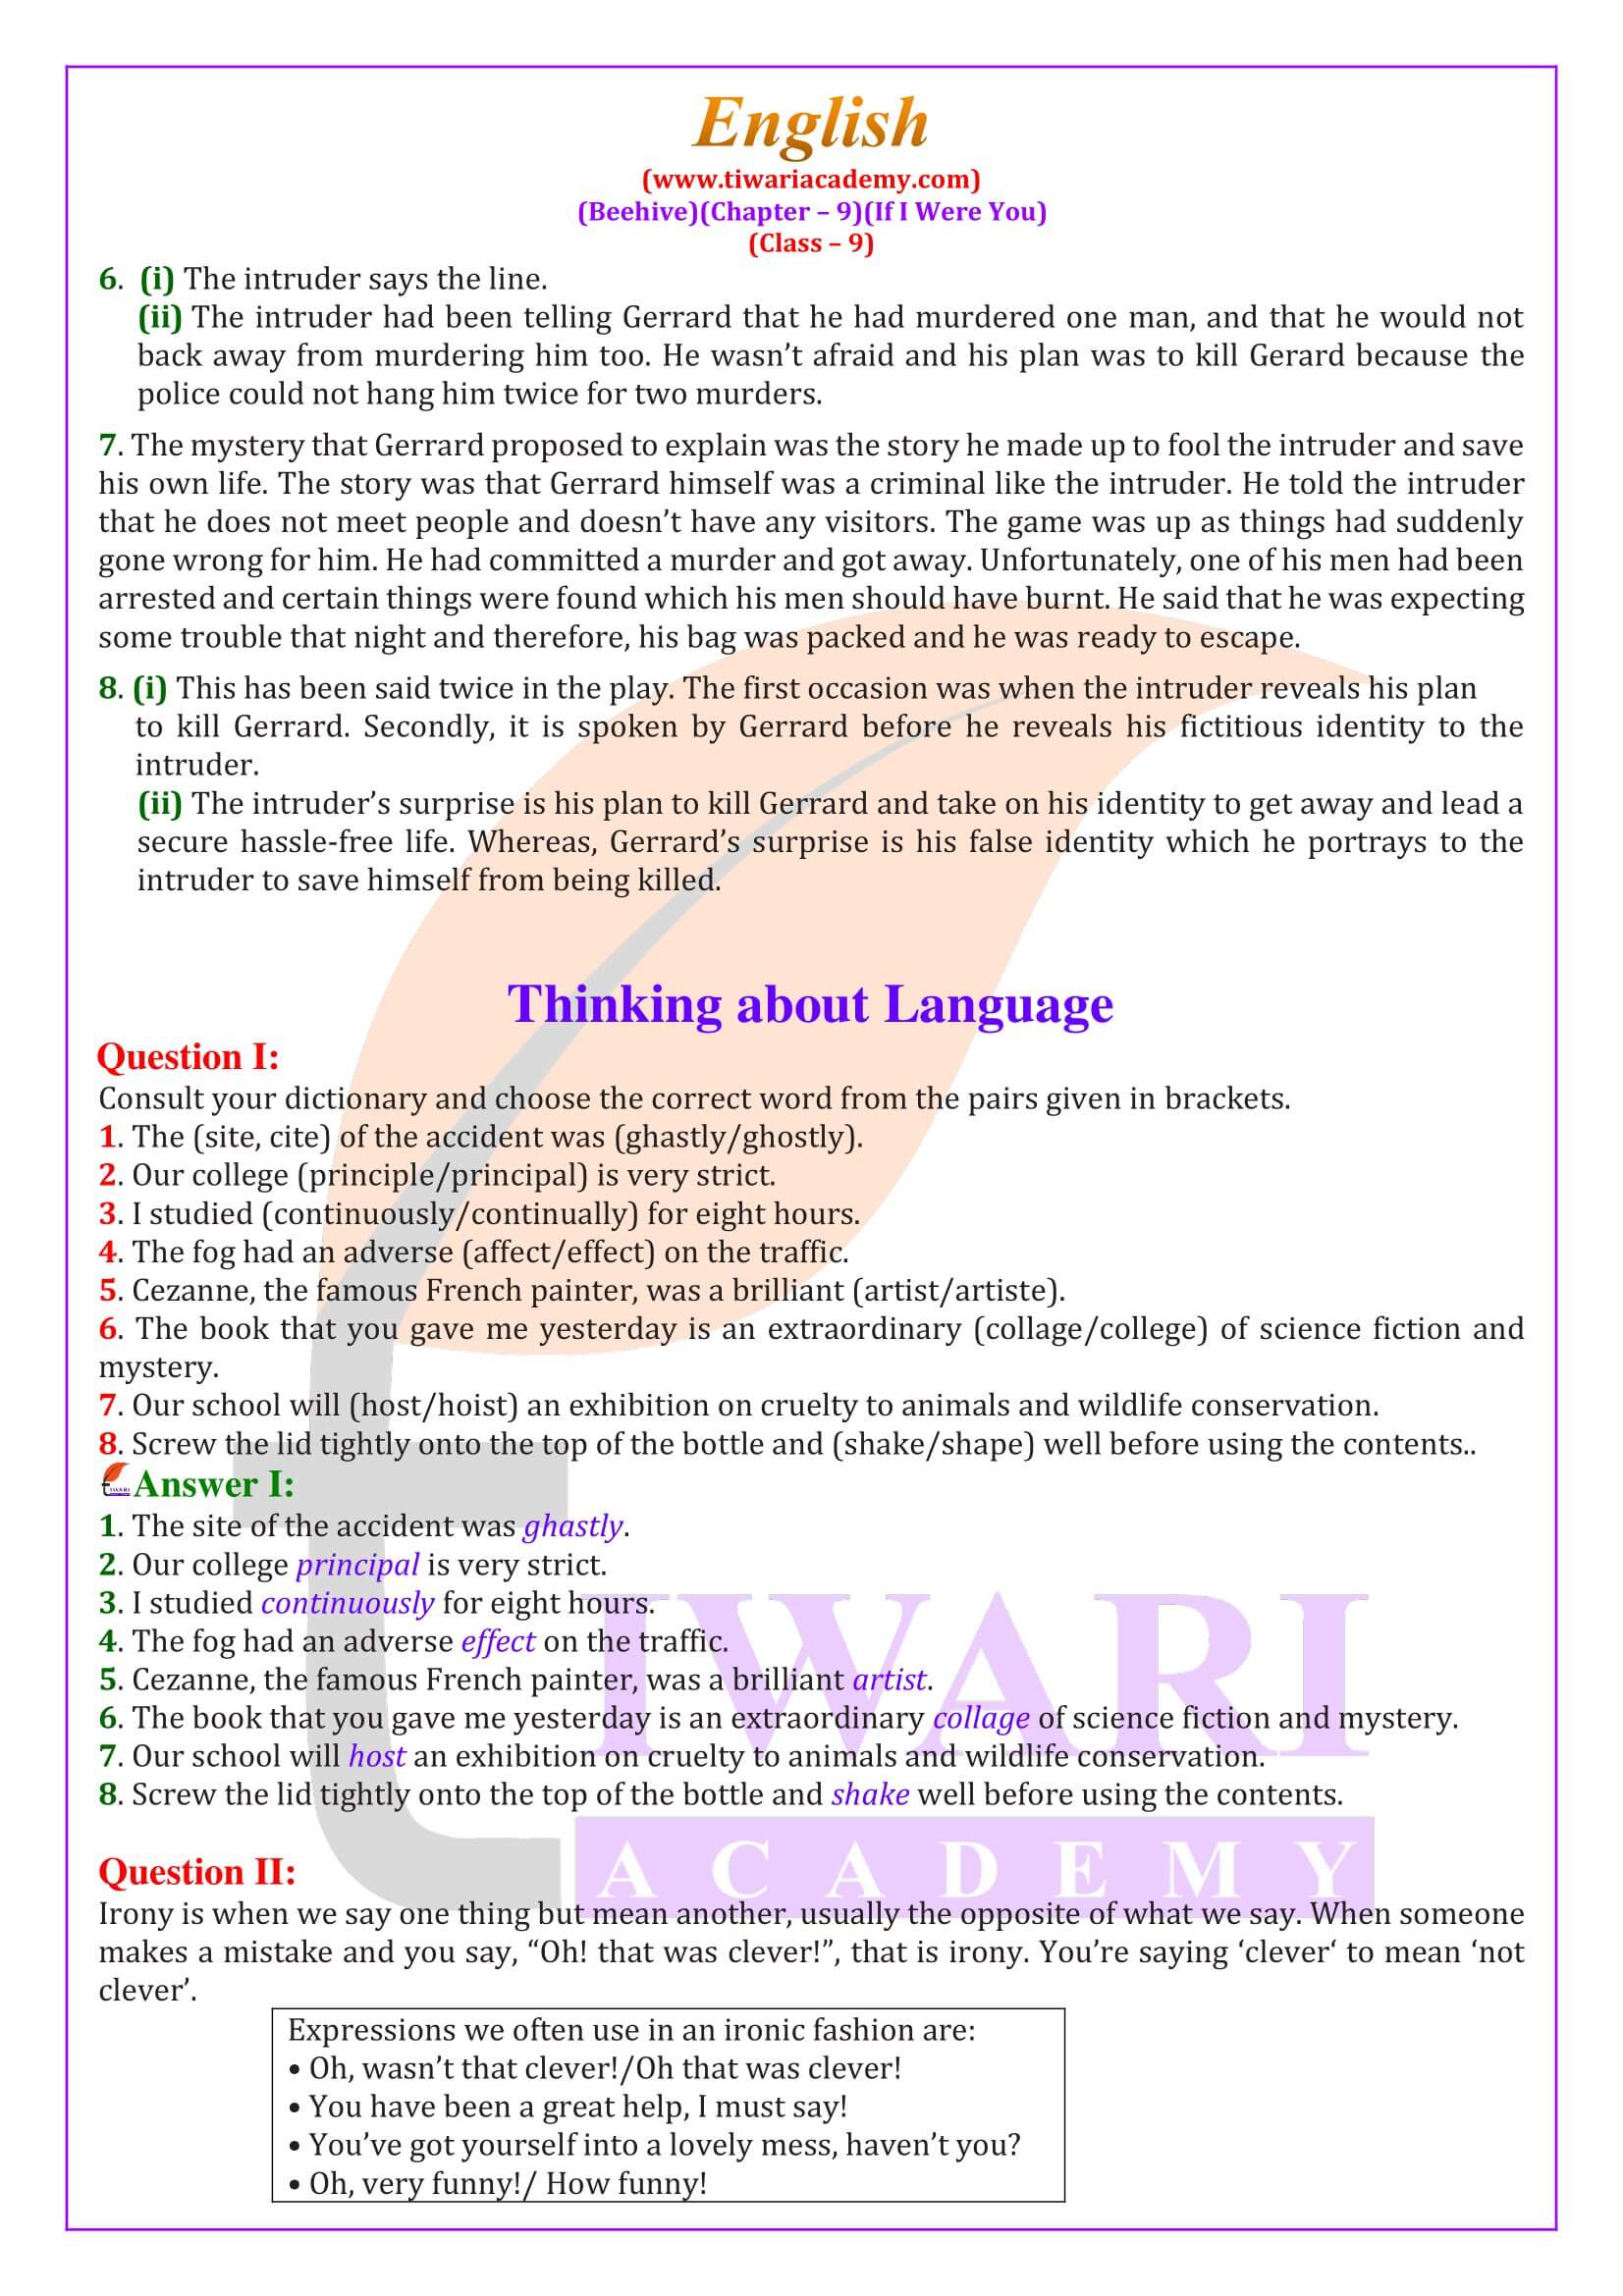 NCERT Solutions Class 9 English Beehive Chapter 9 If I Were You